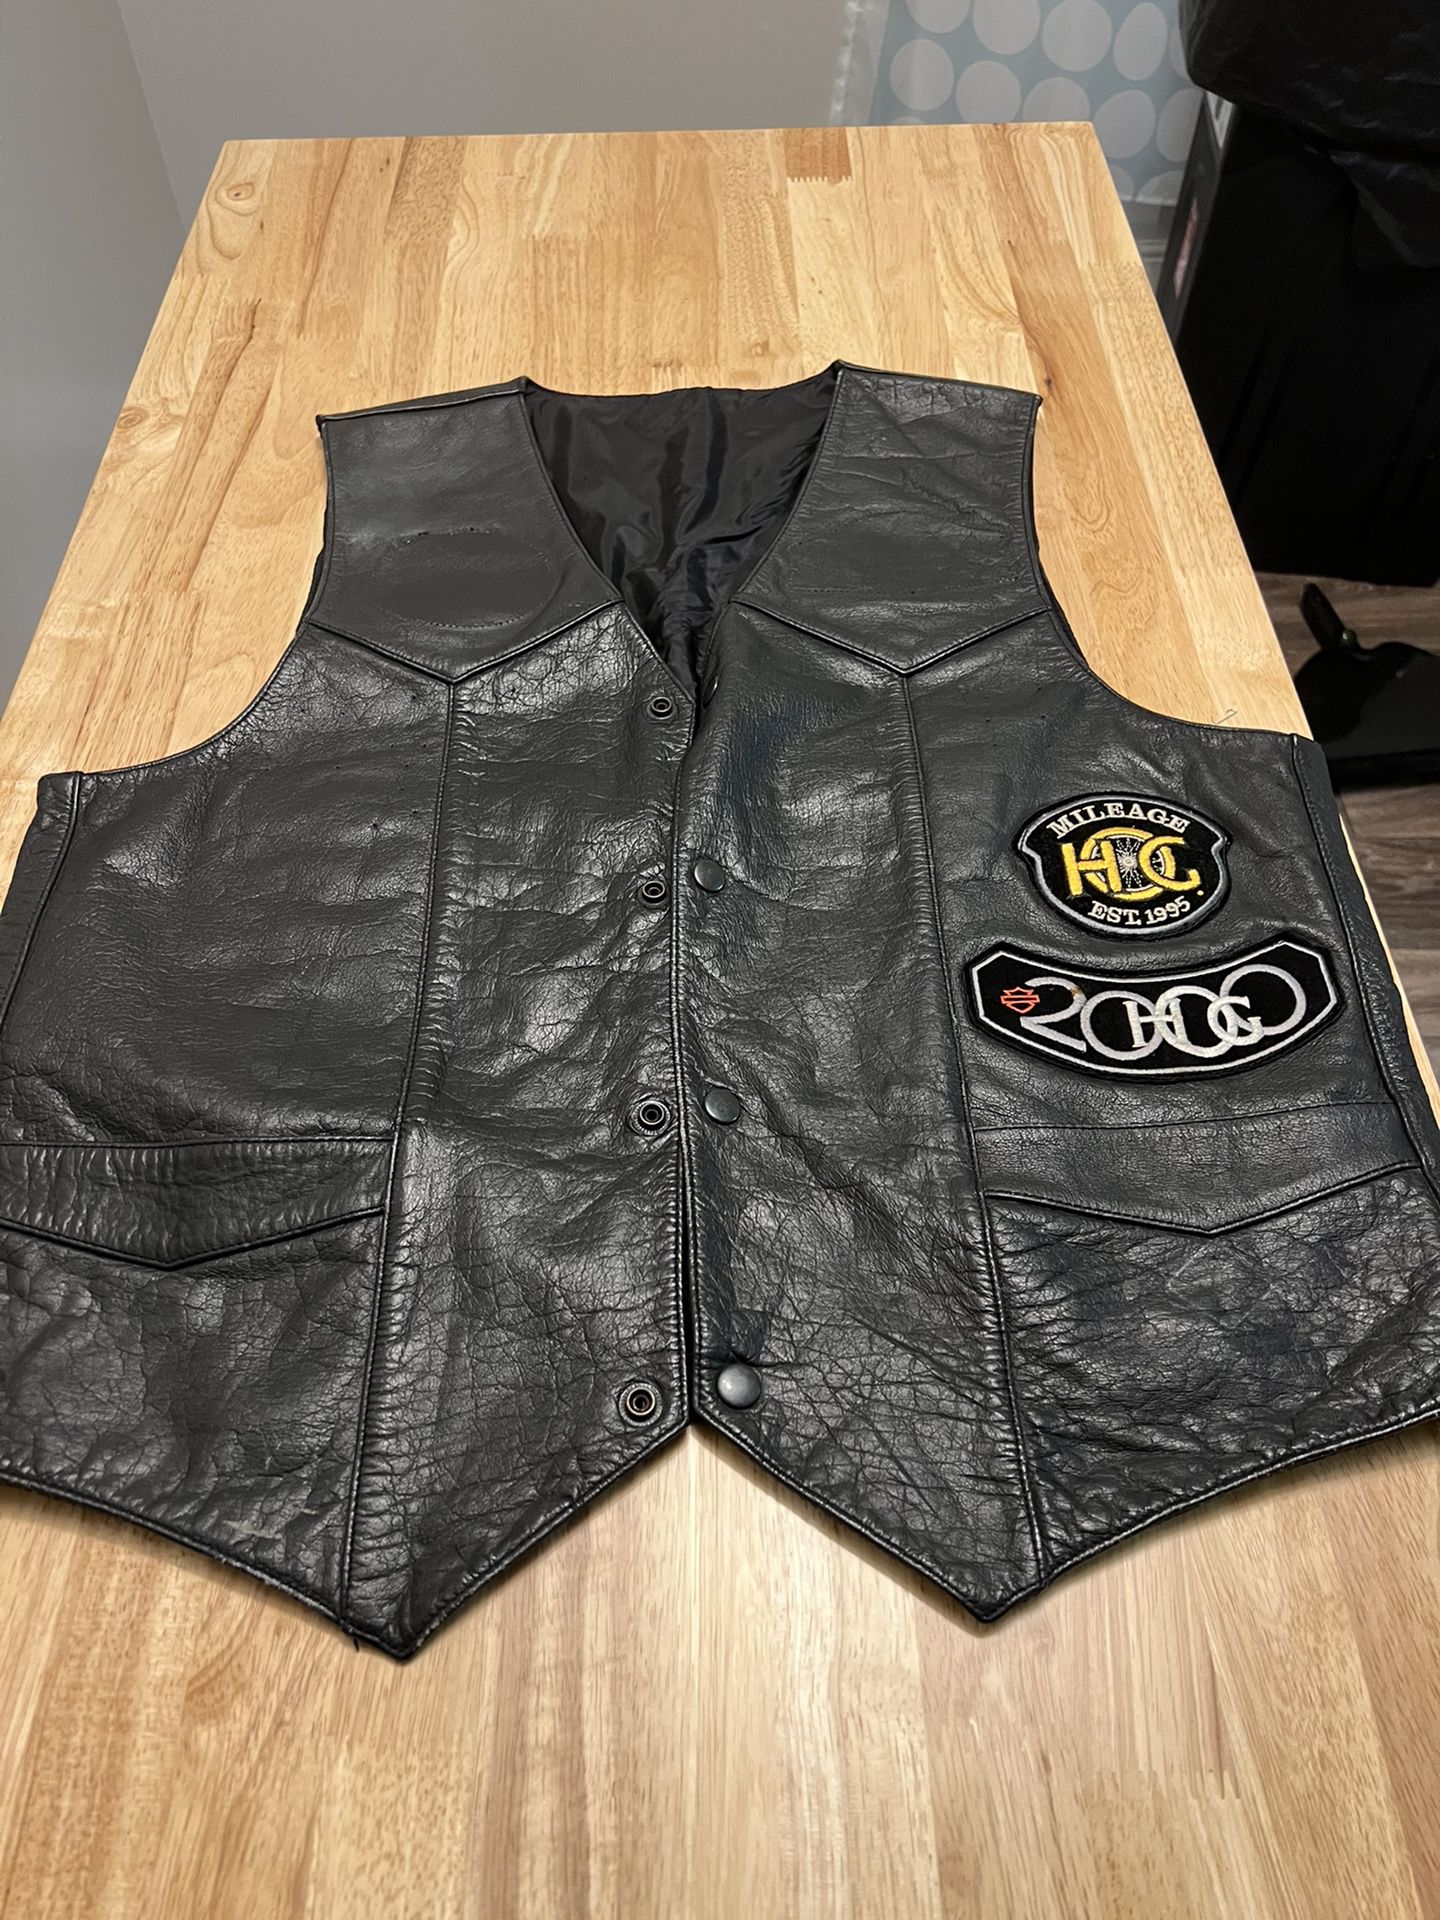 Leather motorcycle style vest